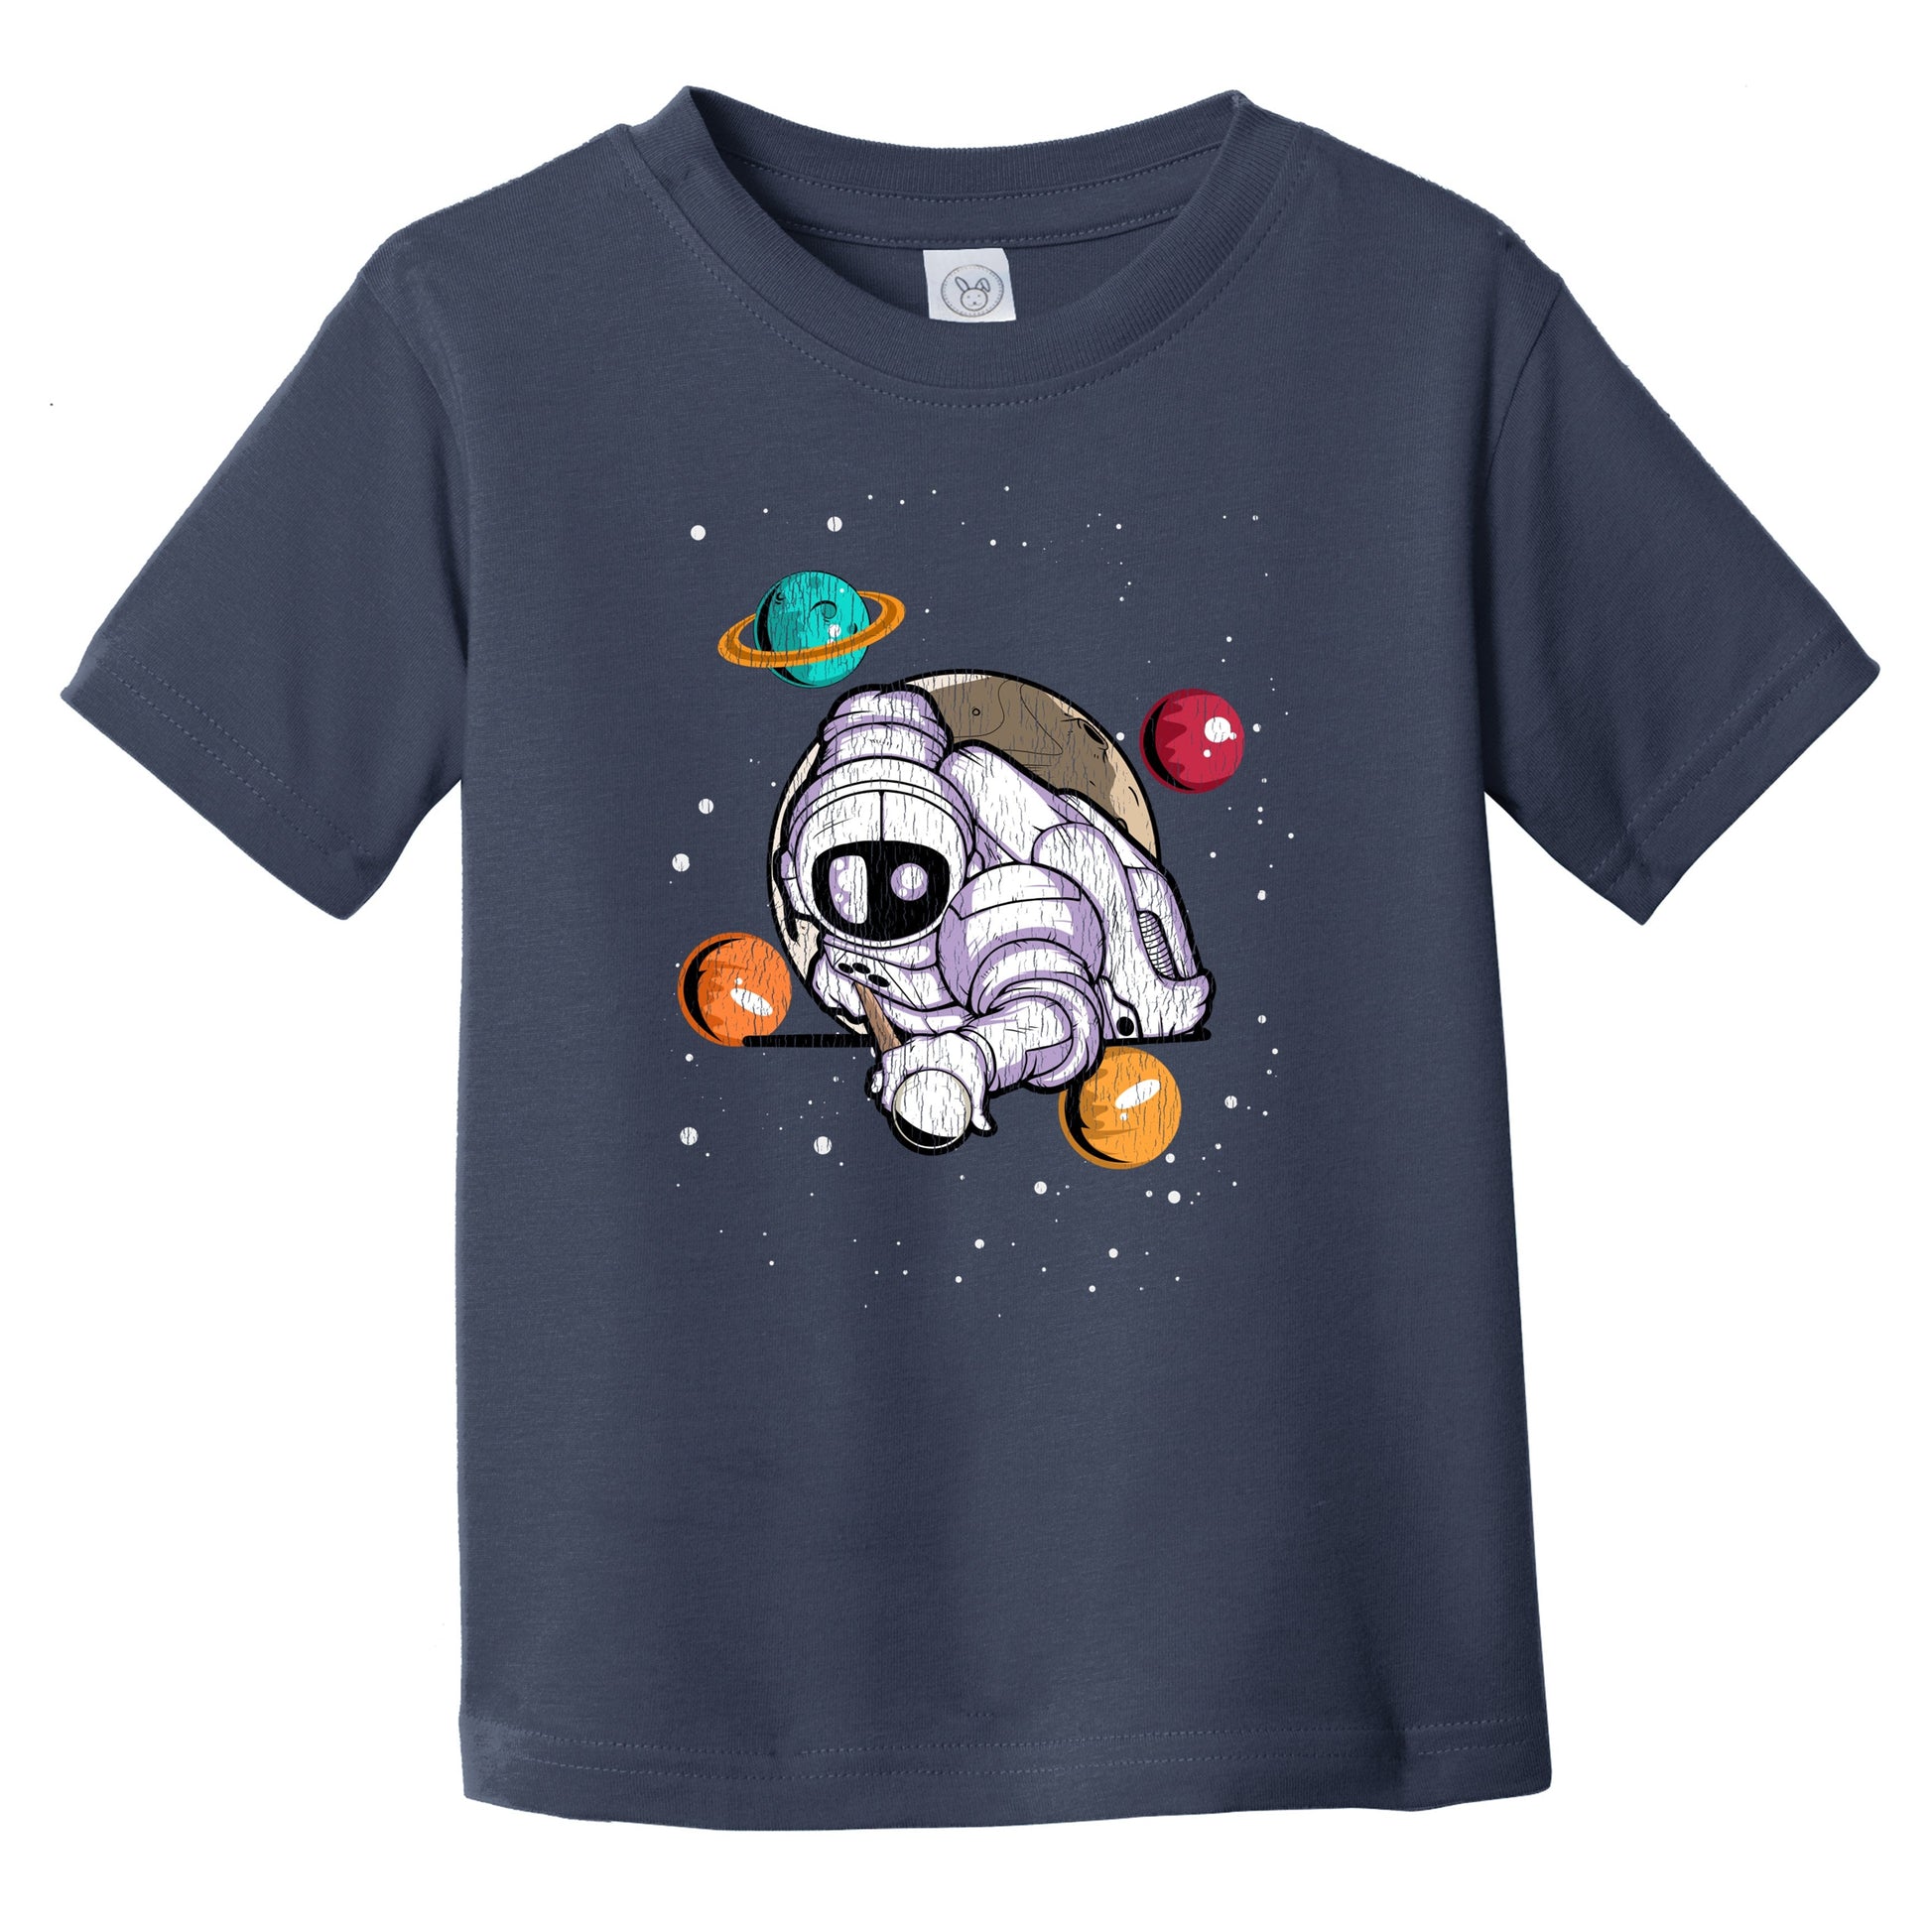 Billiards Astronaut Outer Space Spaceman Distressed Infant Toddler T-Shirt